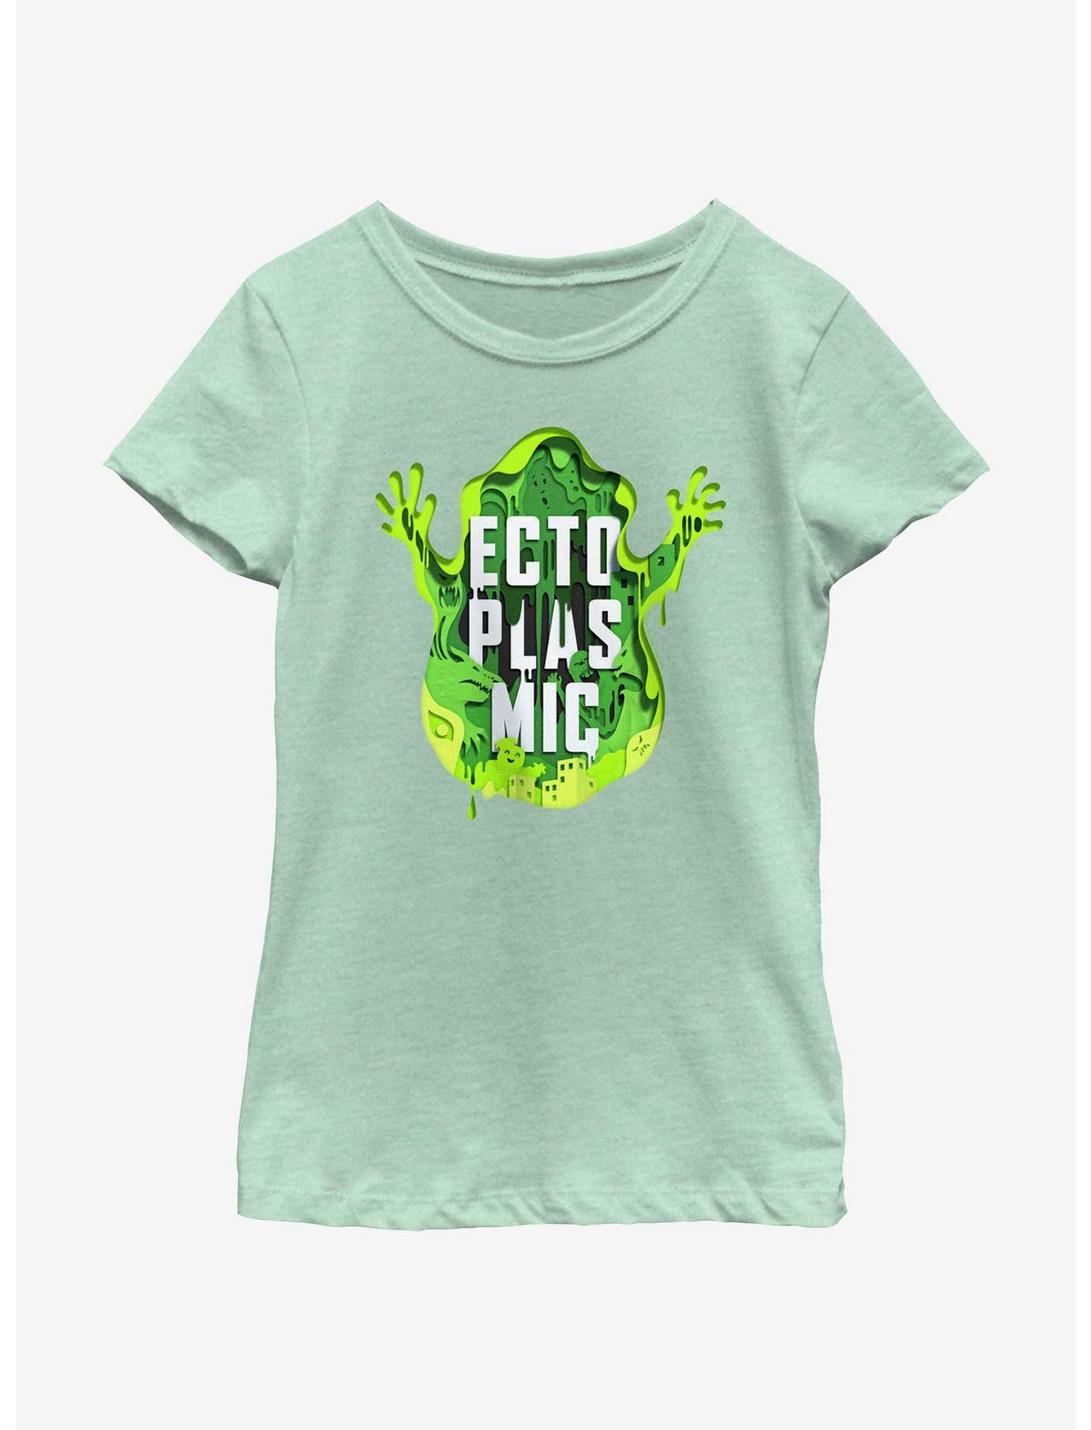 Ghostbusters: Frozen Empire Ectoplasmic Slimer Girls Youth T-Shirt, MINT, hi-res